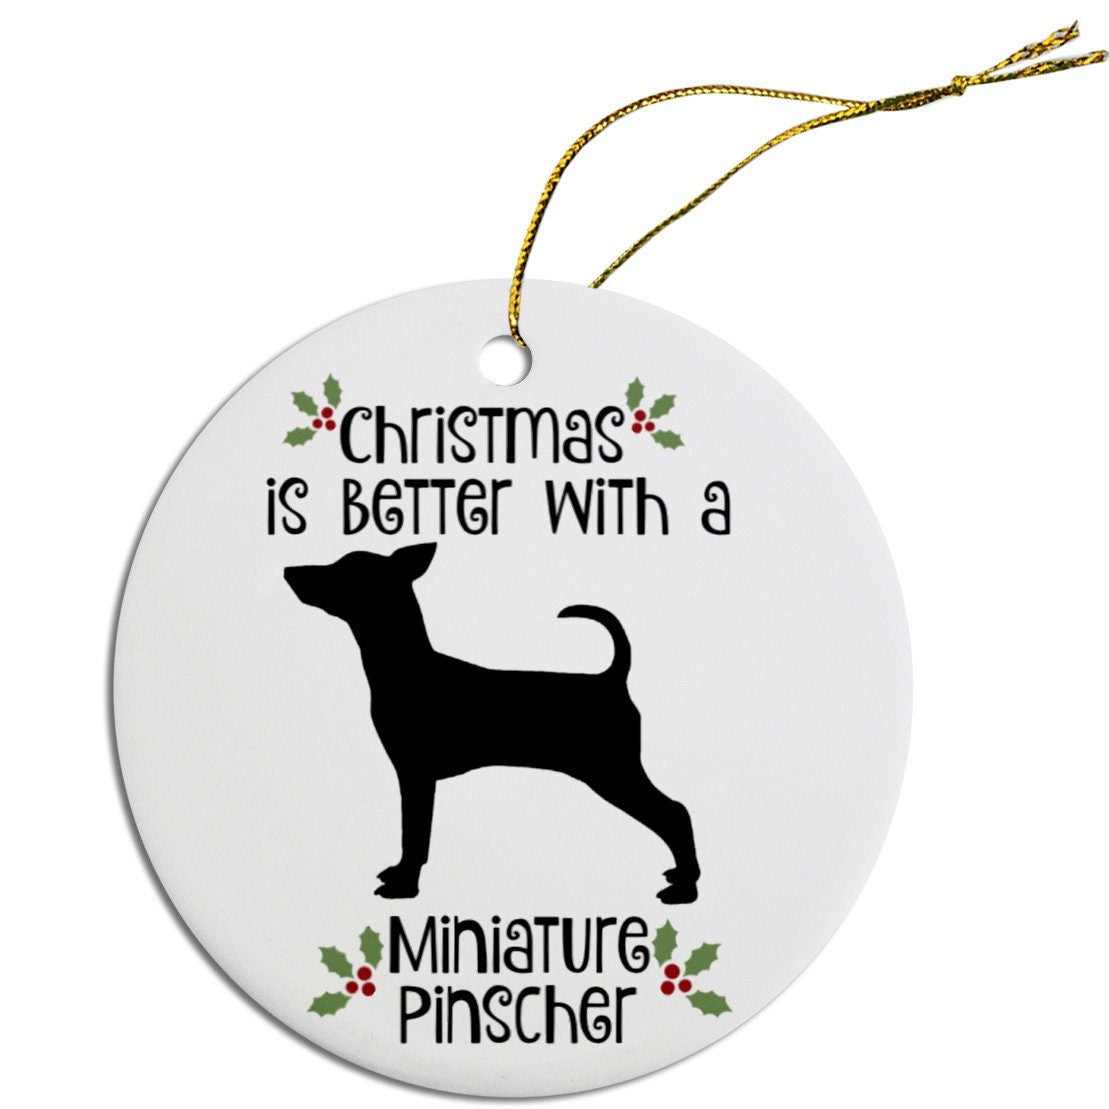 Dog Breed Specific Round Christmas Ornament, "Miniature Pinscher"